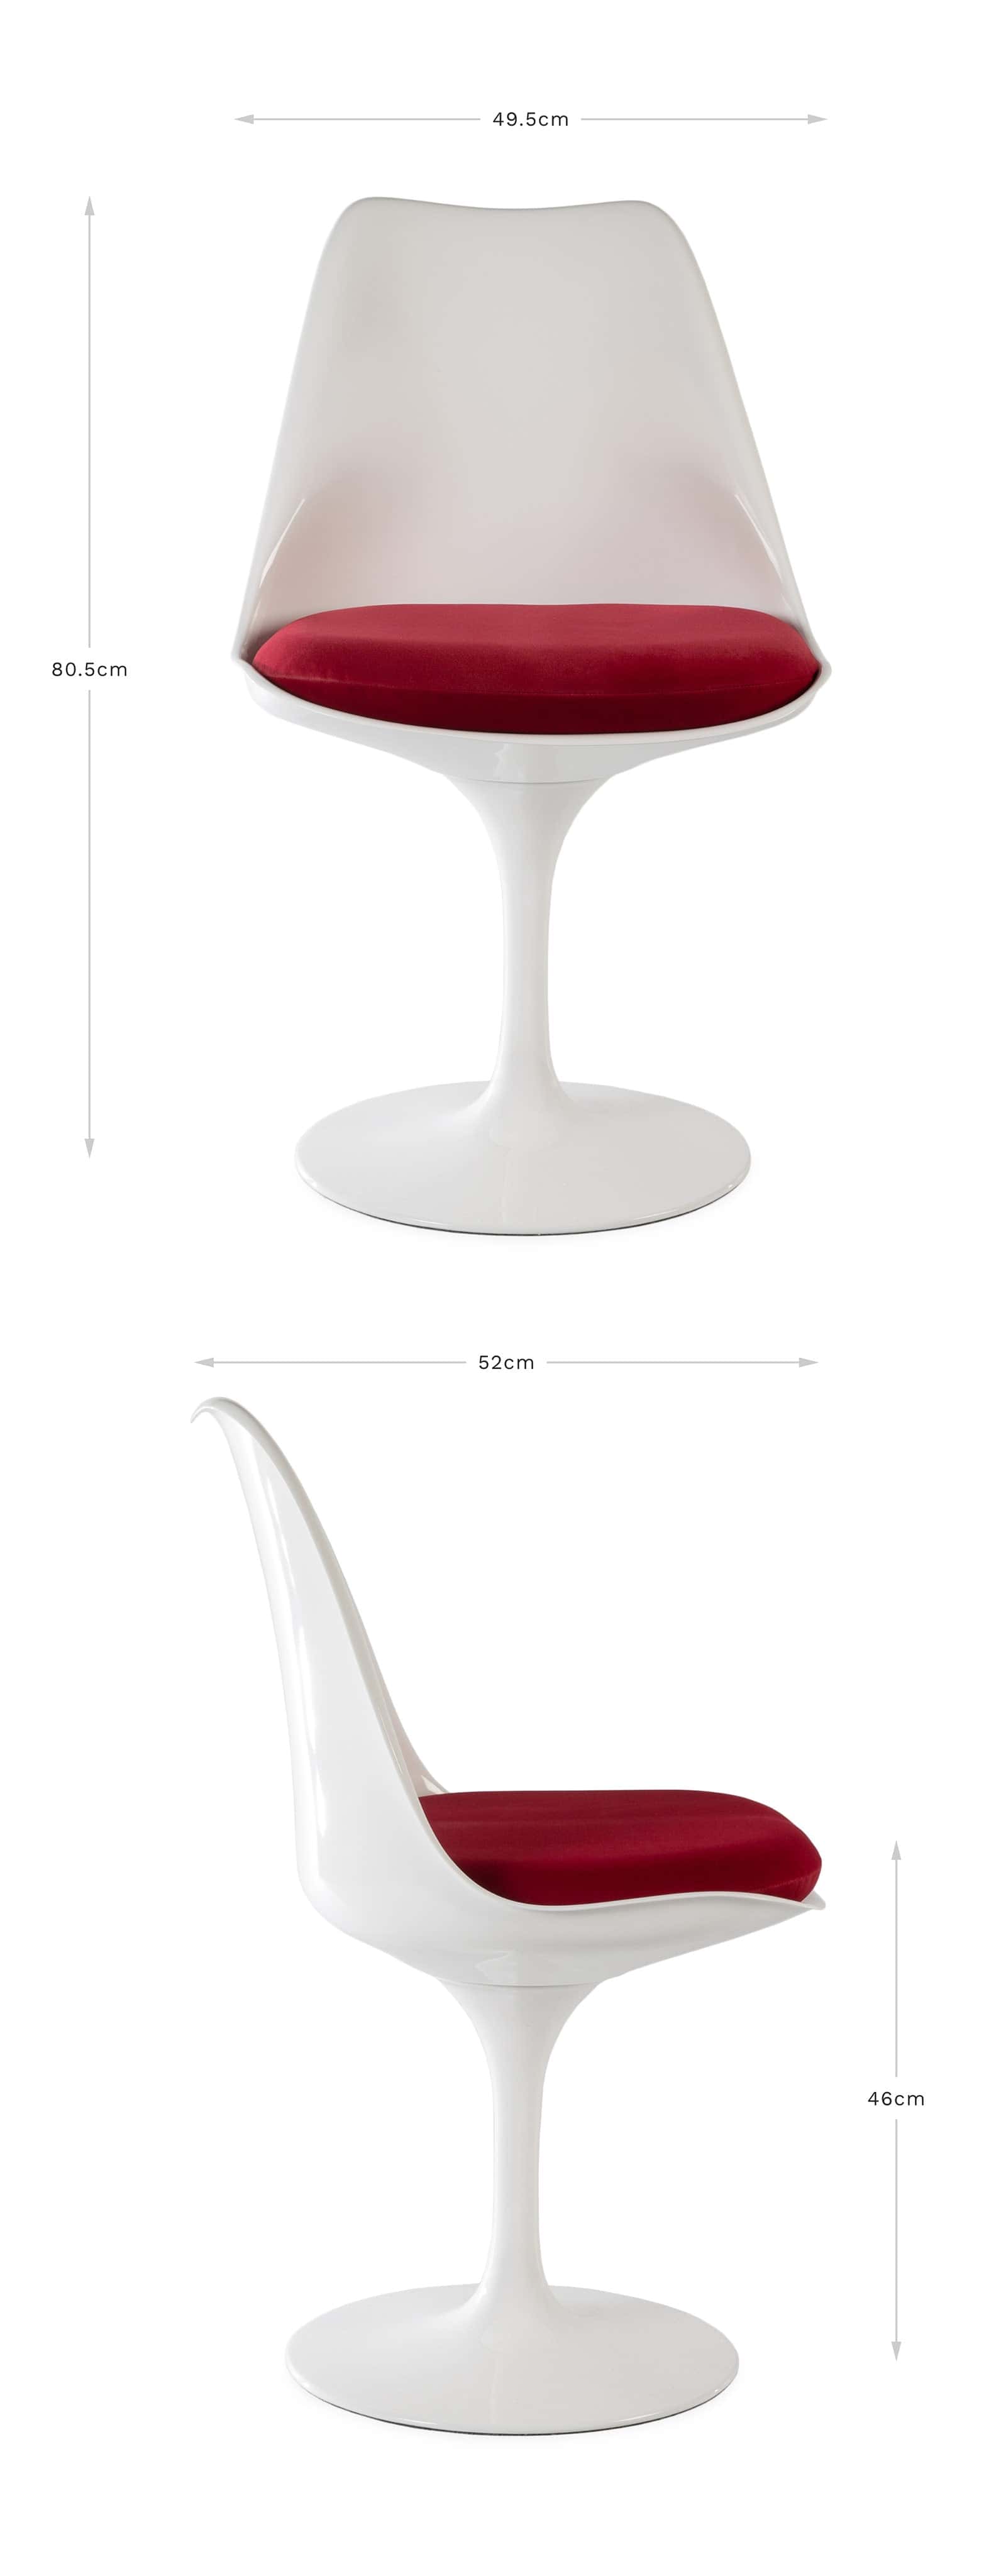 Adapted for viewing on your mobile or tablet device, this banner is designed to visually demonstrate the dimensions of the Saarinen Tulip Side Chair